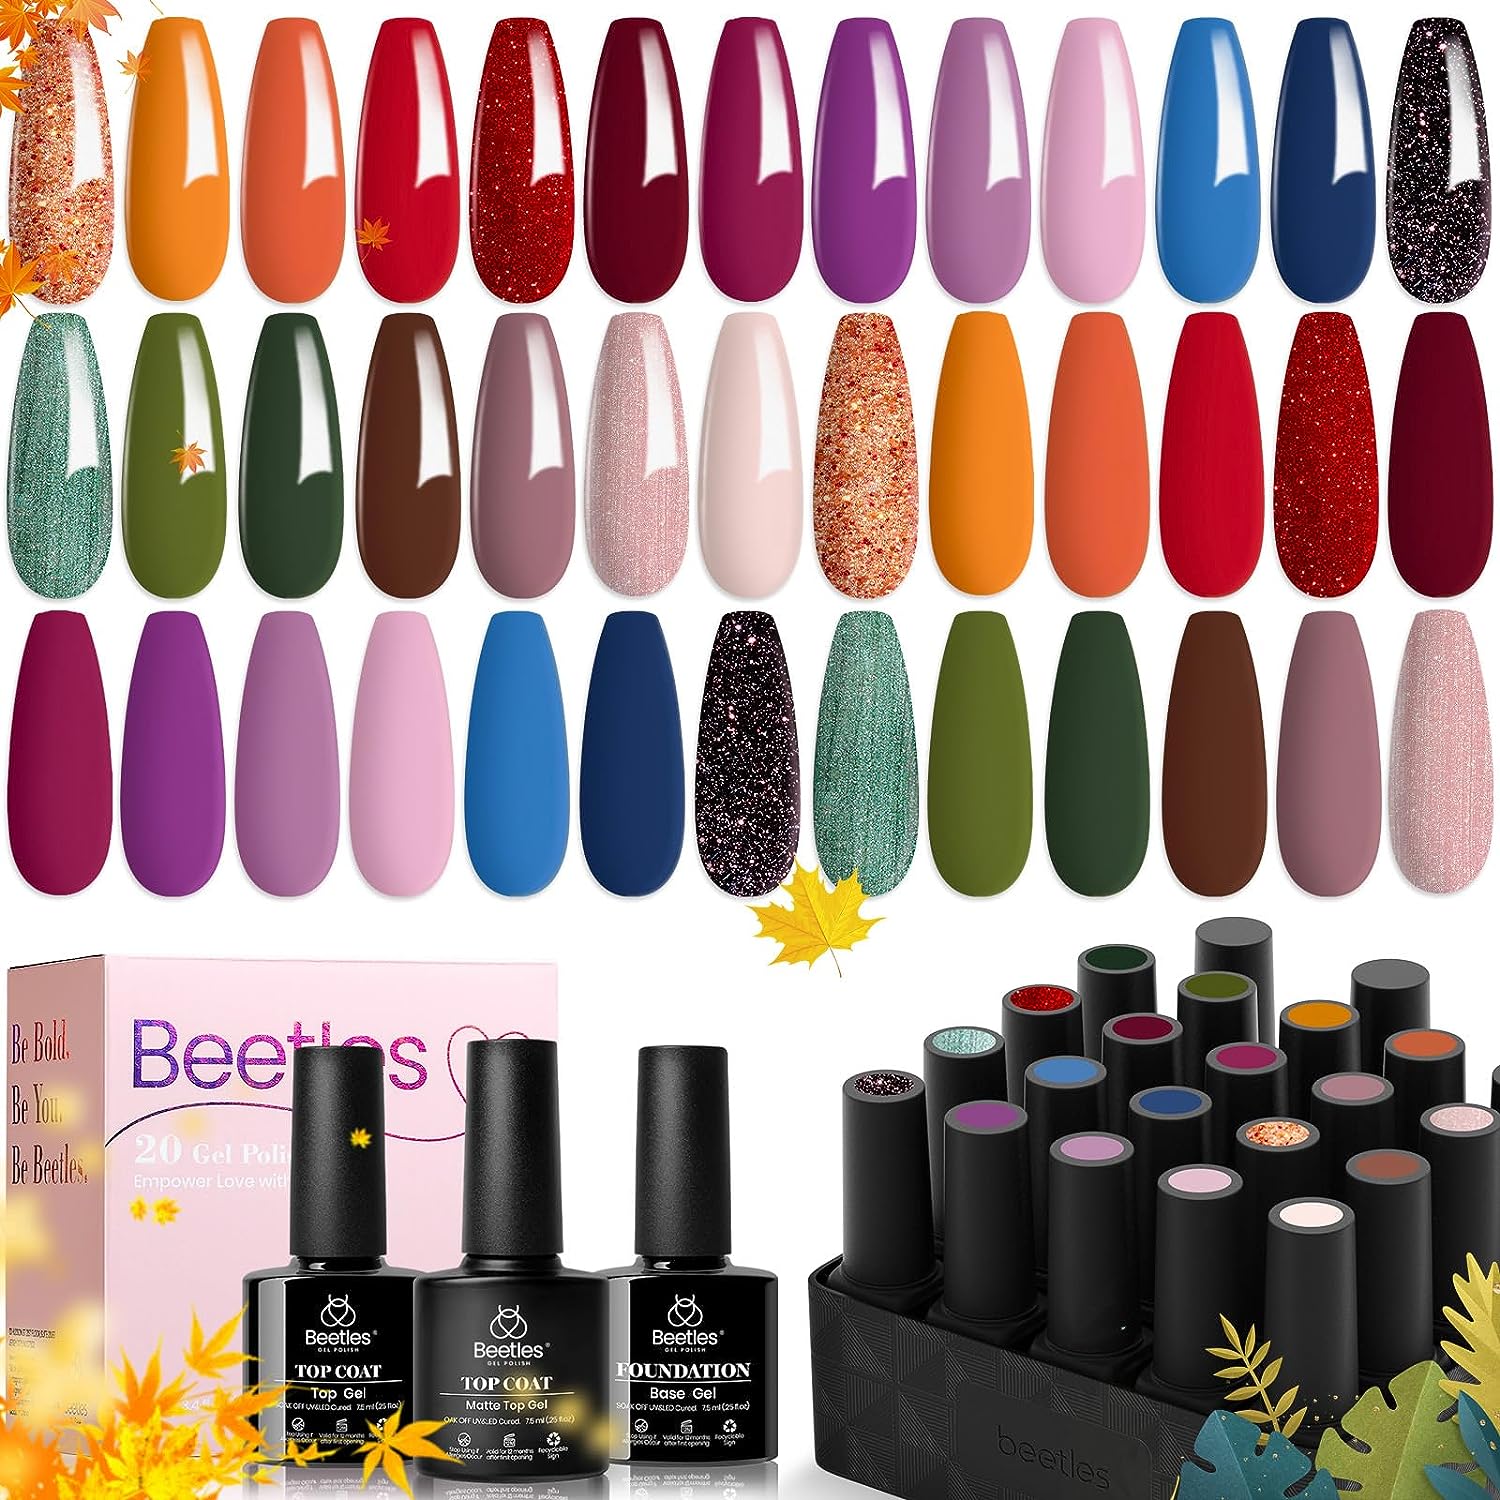 Fall Yard - 20 Gel Colors Set with Top and Base Coat (5ml/Each)